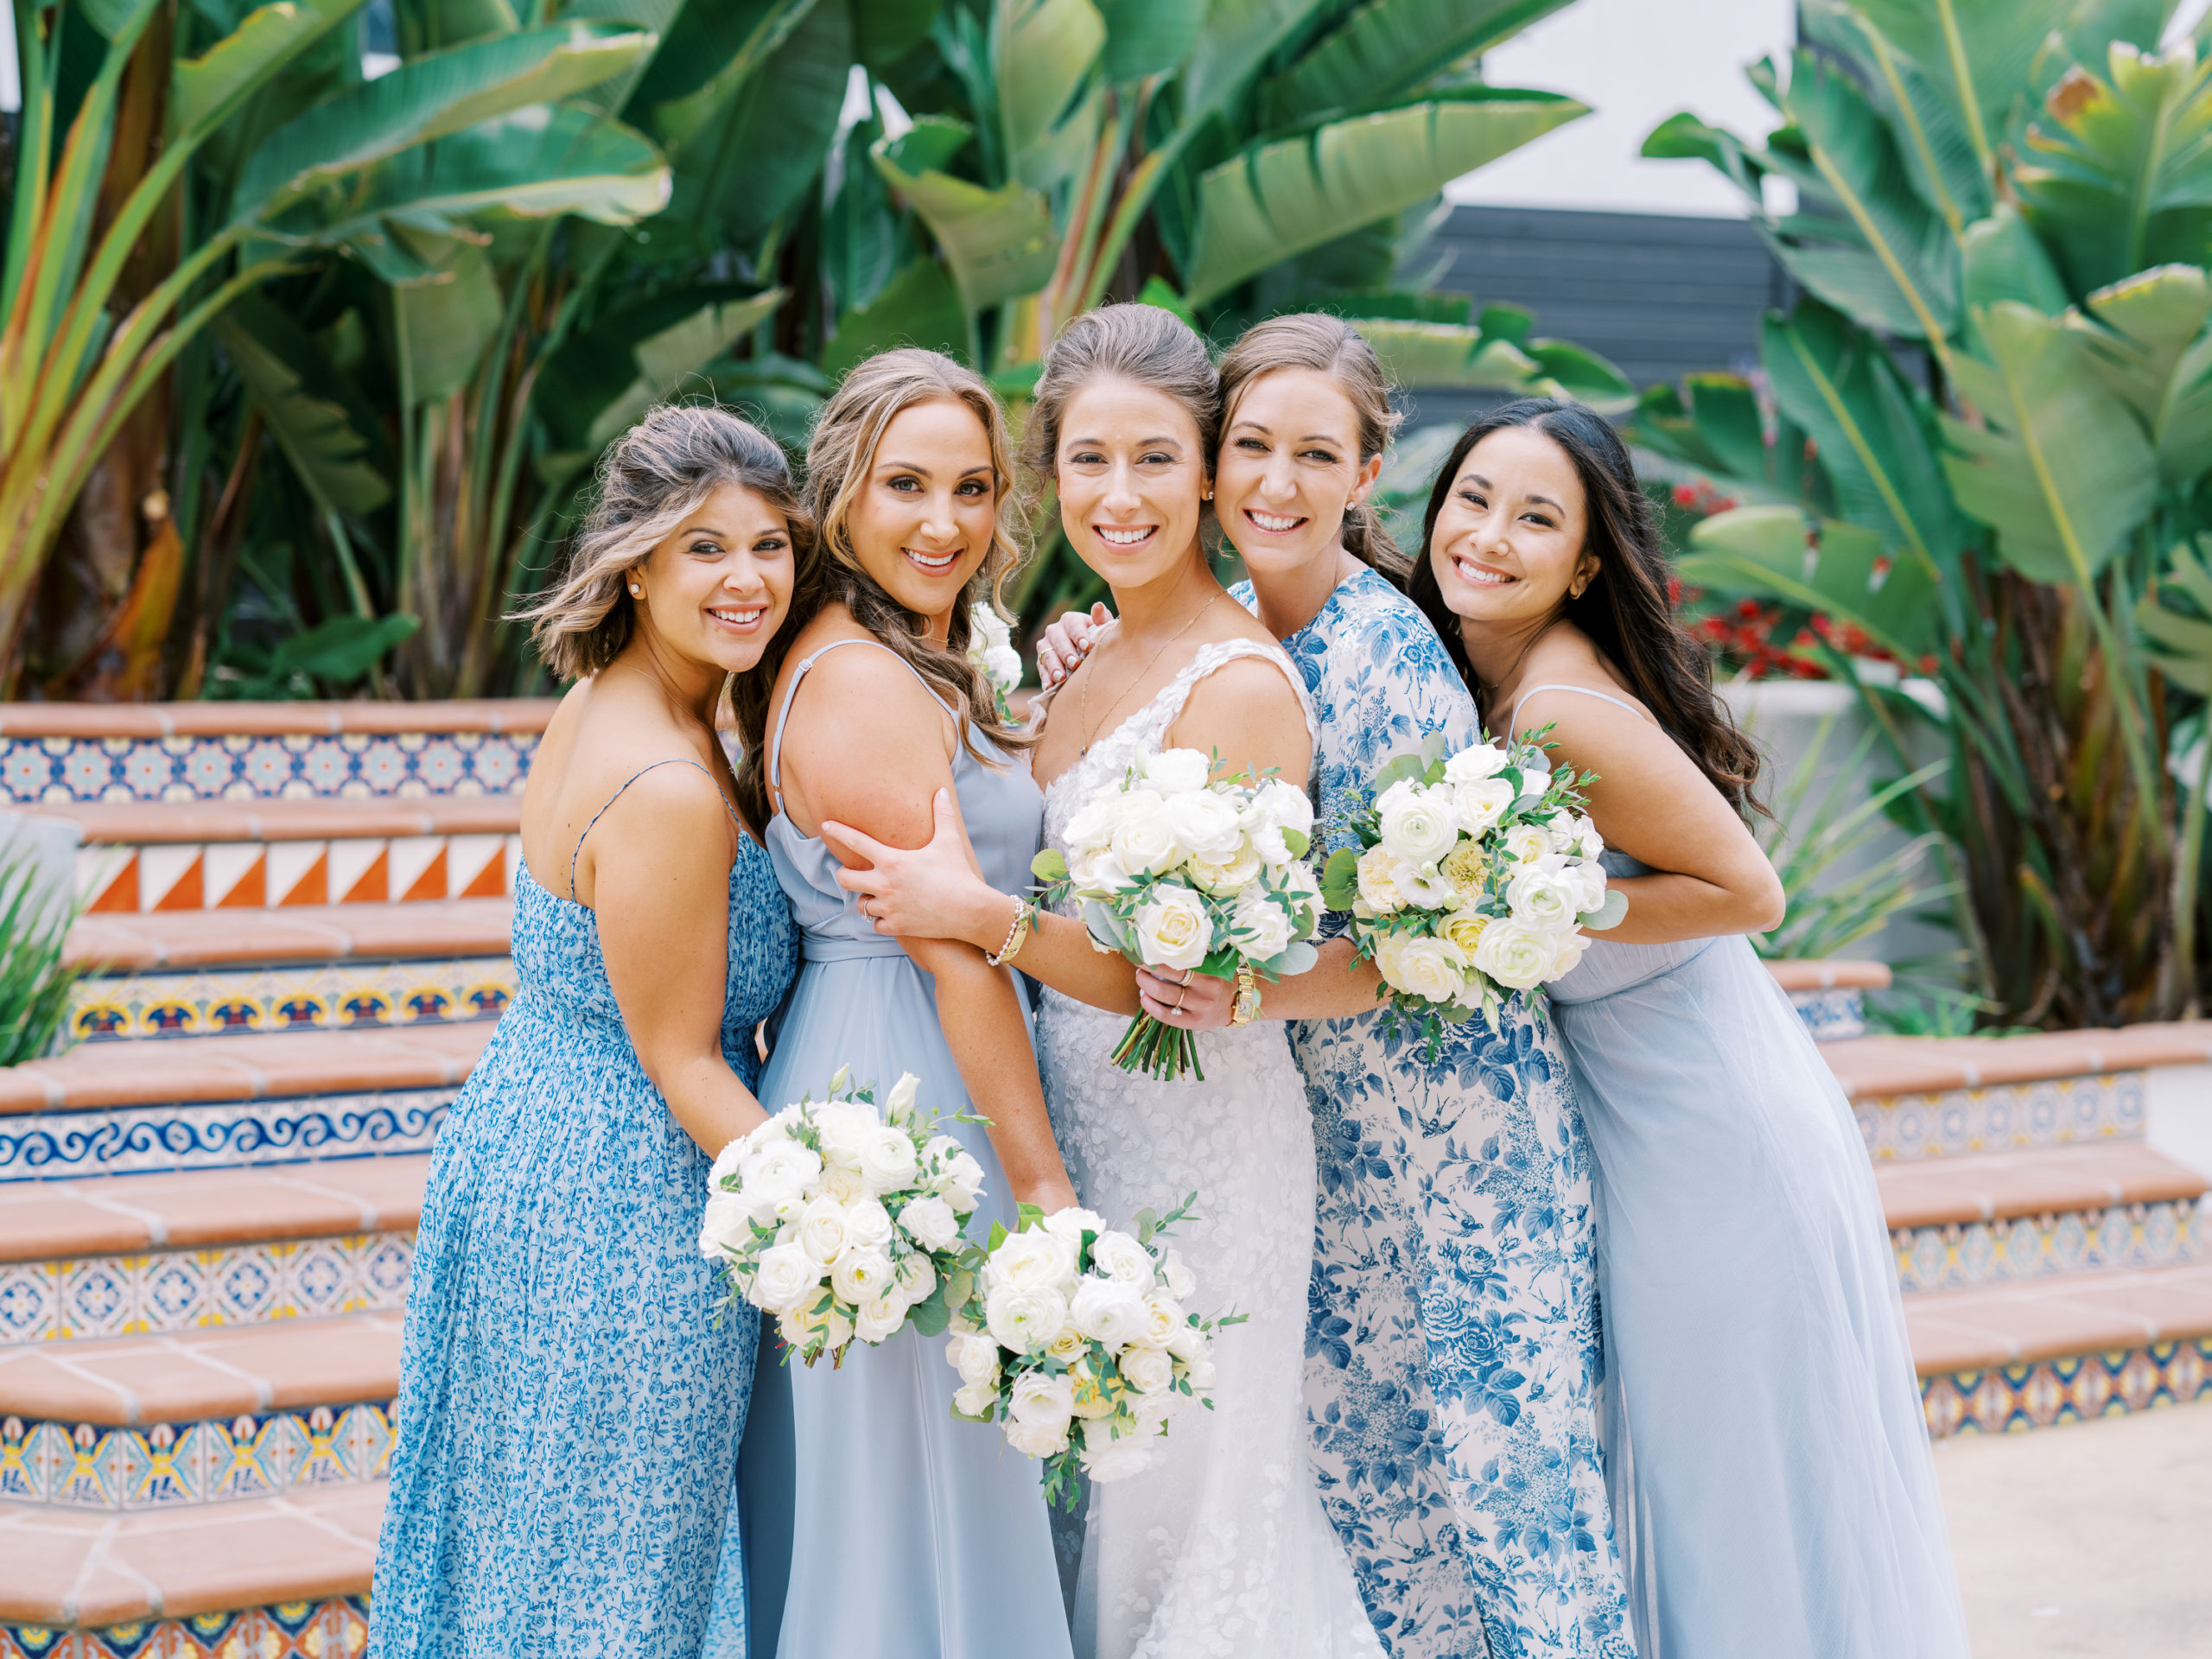 Lizzie and Bridal Party on wedding day at La lomita ranch wedding